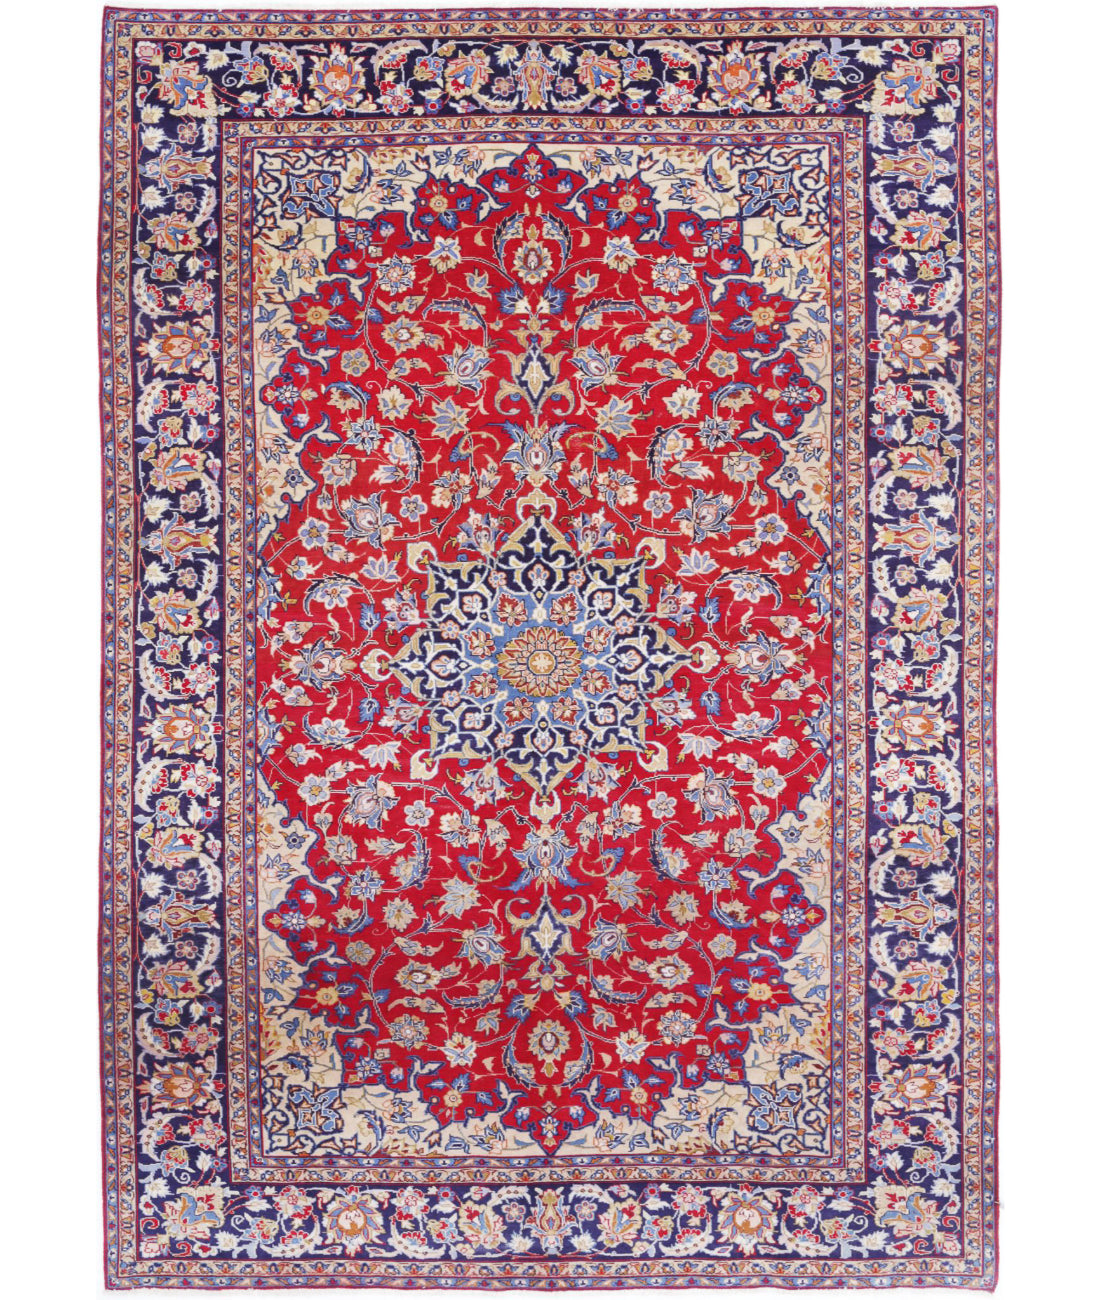 Hand Knotted Persian Tabriz Wool Rug - 7'10'' x 11'1'' 7'10'' x 11'1'' (235 X 333) / Red / Blue